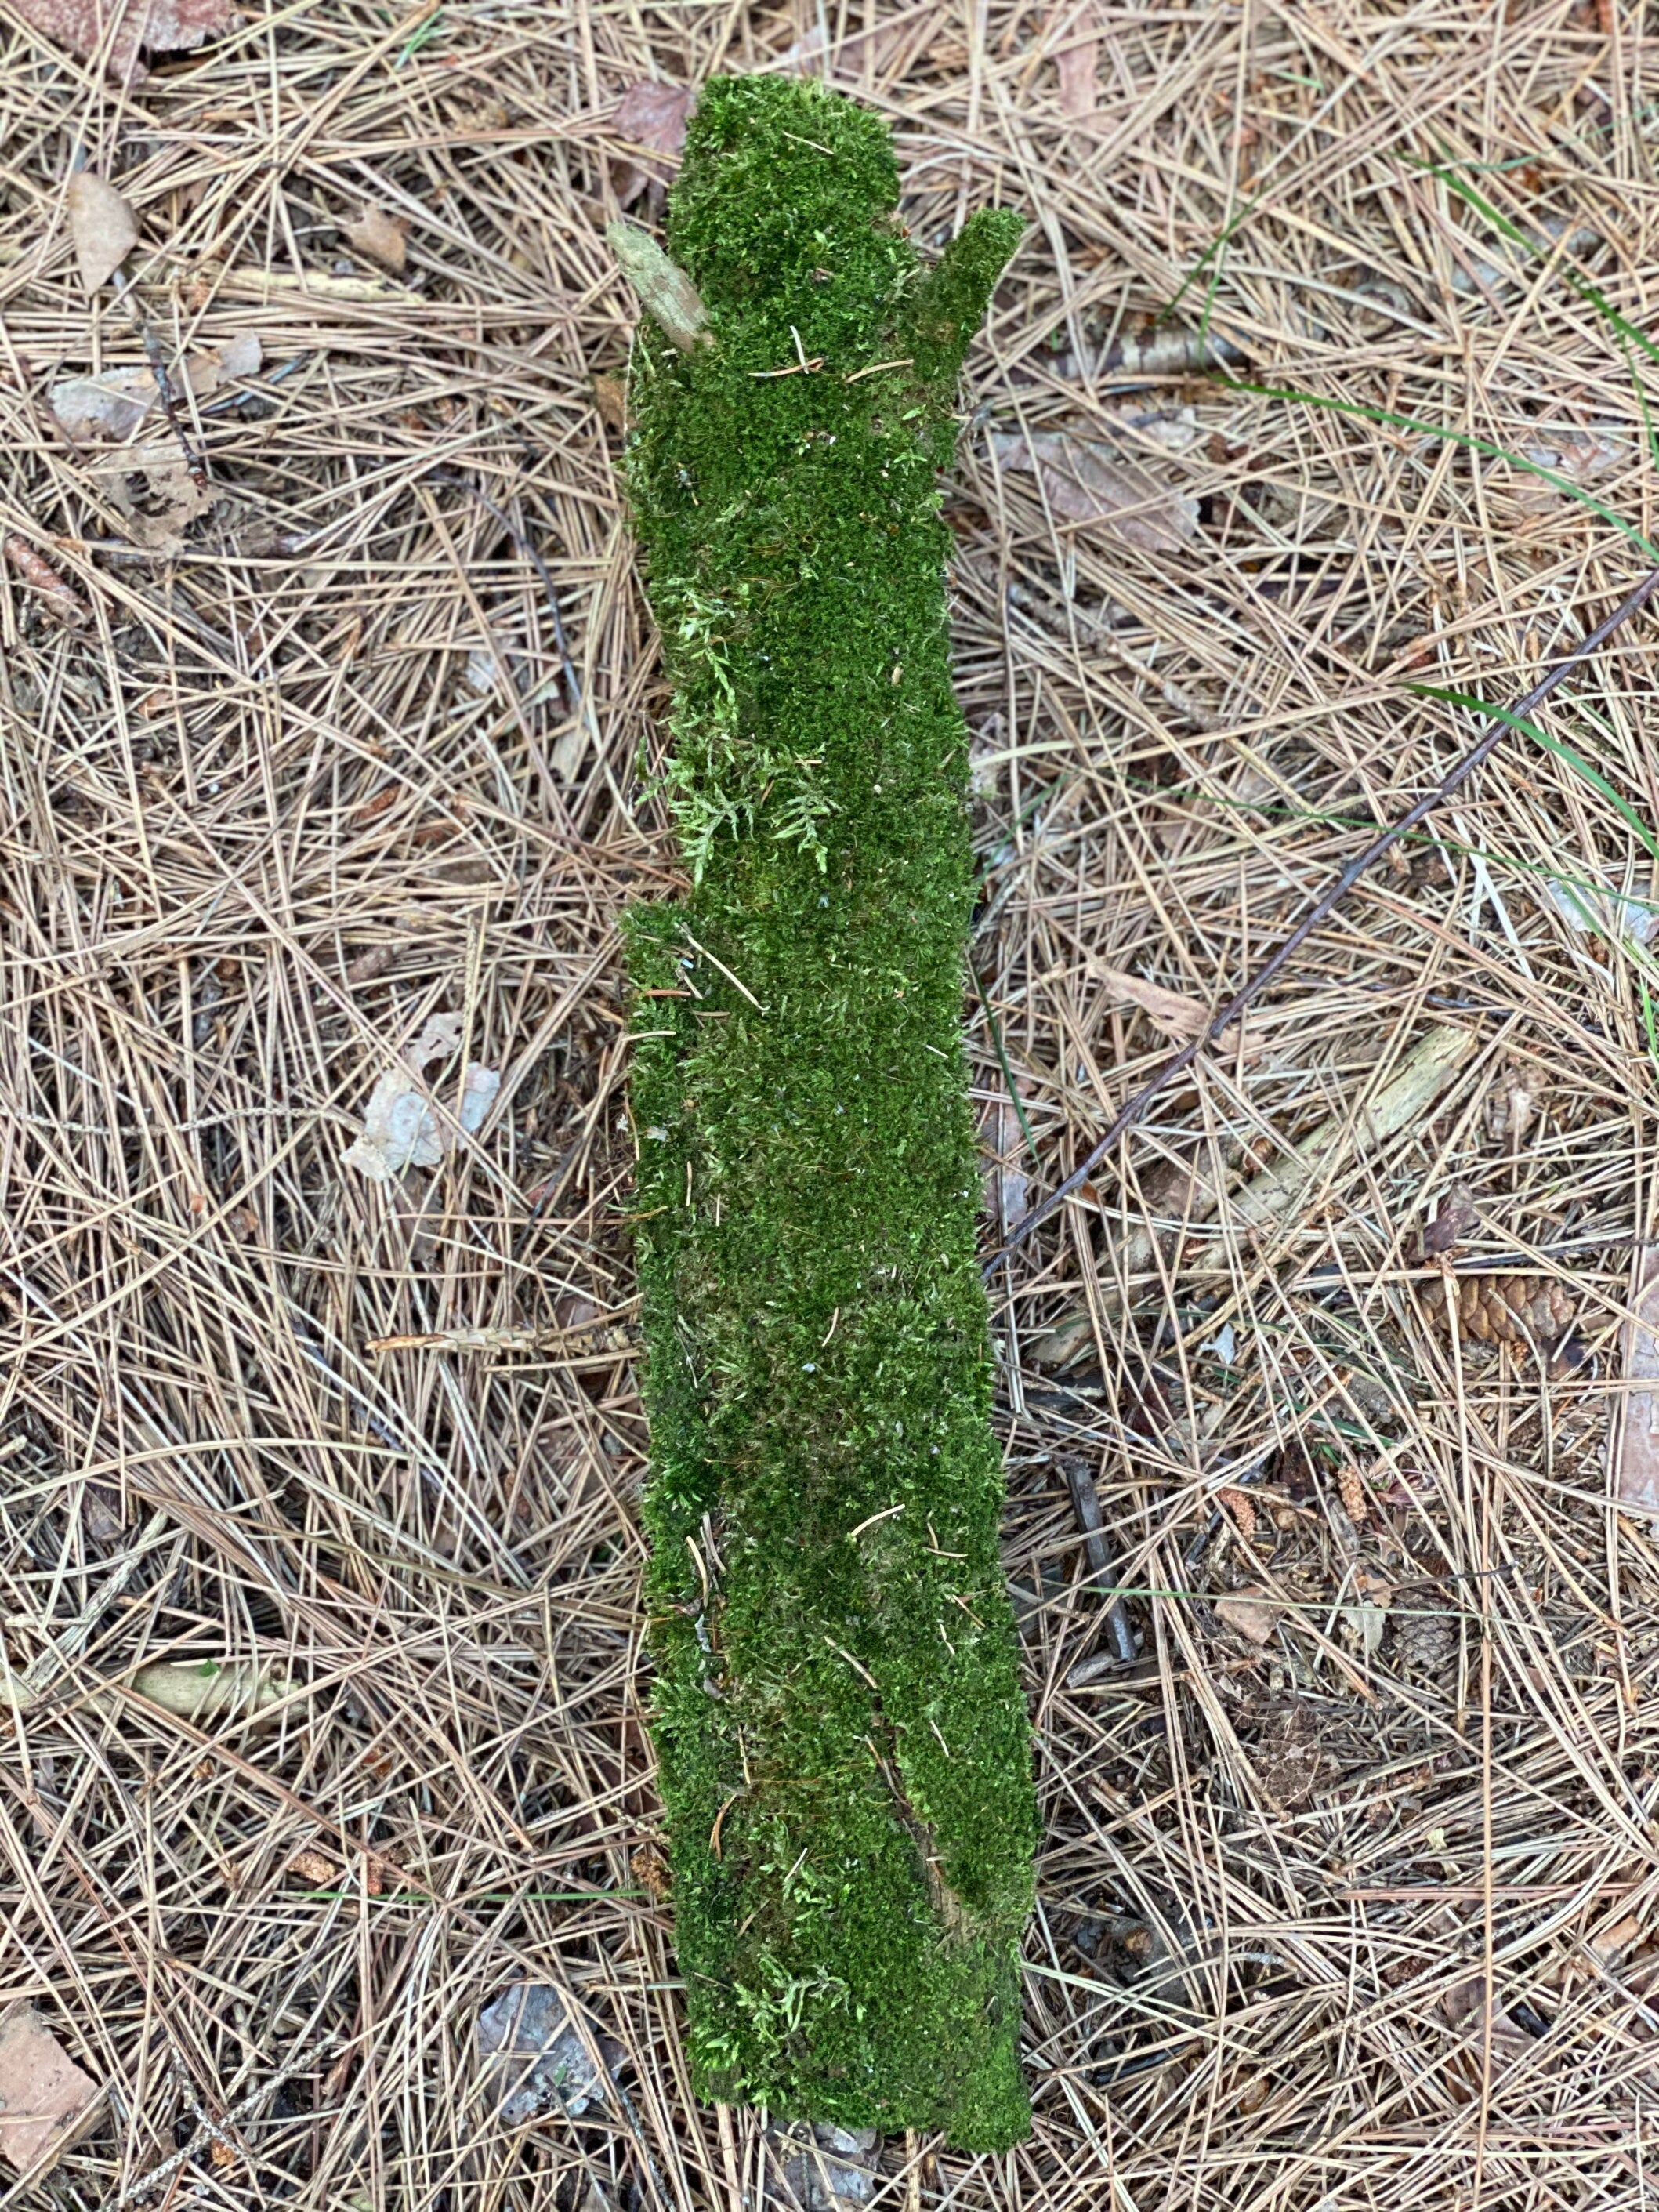 Moss Covered Log, Mossy Log, 17 Inches Long by 3 Inches Wide and 2 Inches High